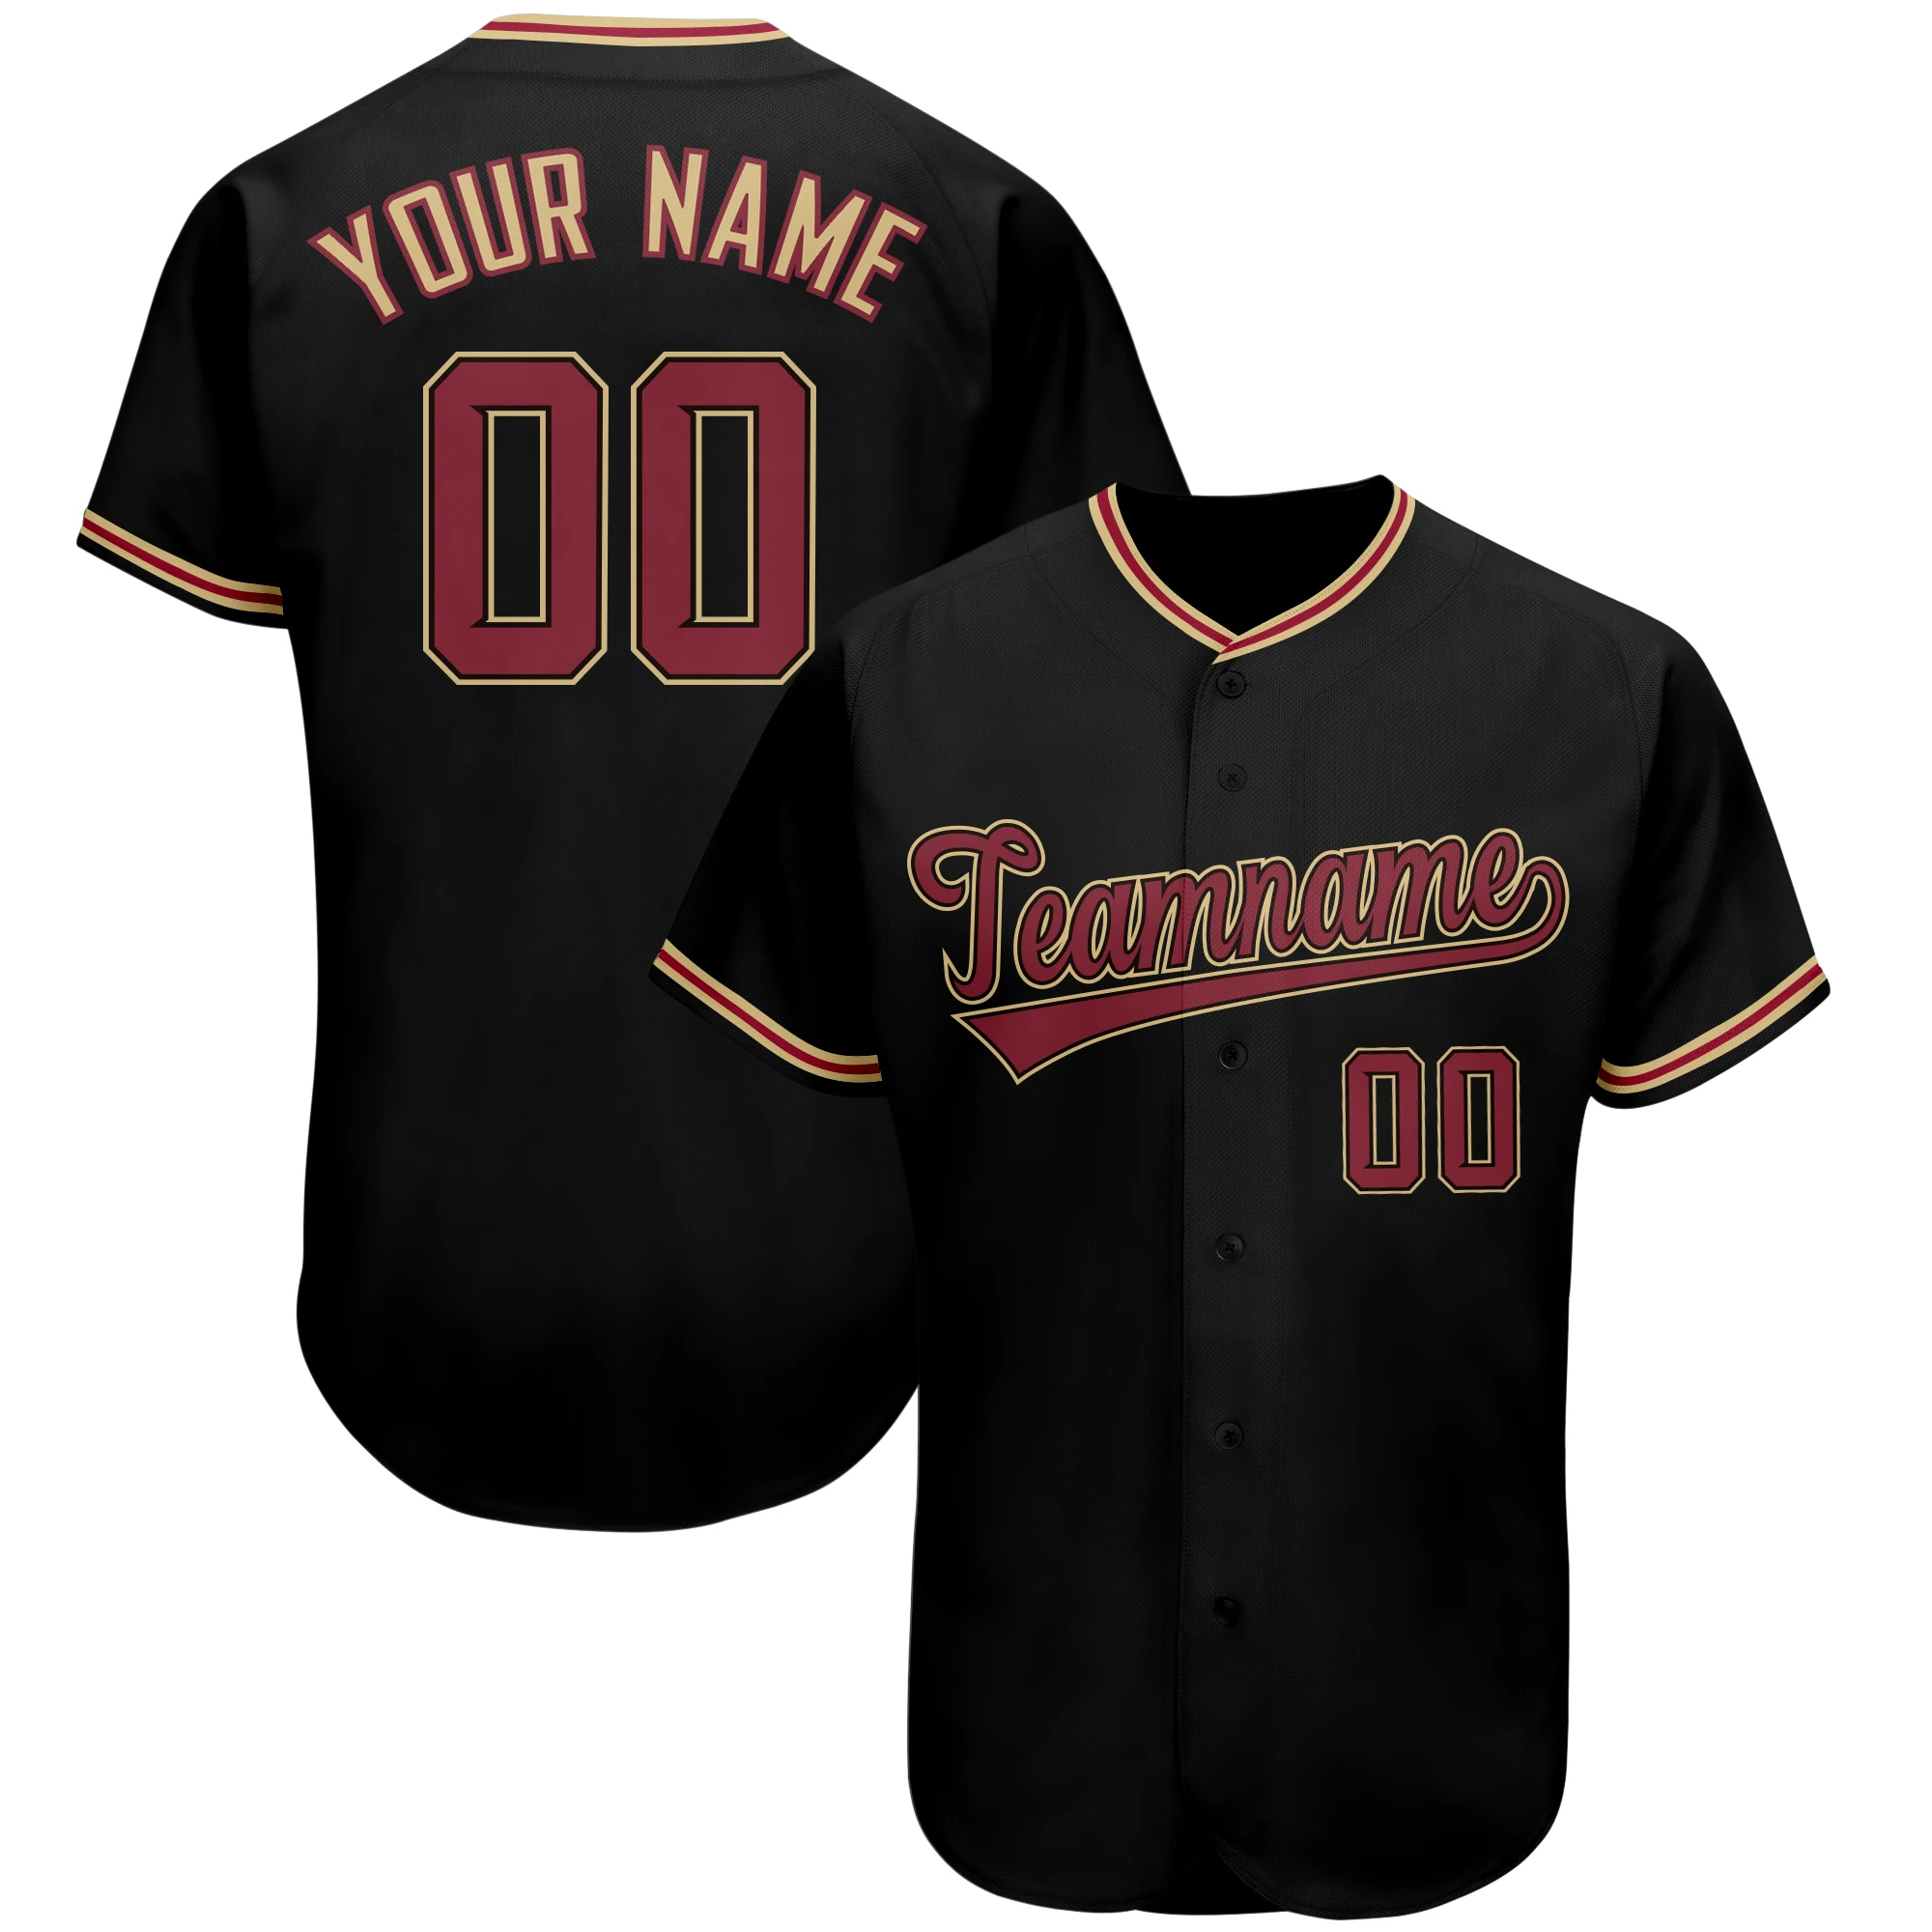 New jersey designs, Full sublimation Jersey free change team name, num